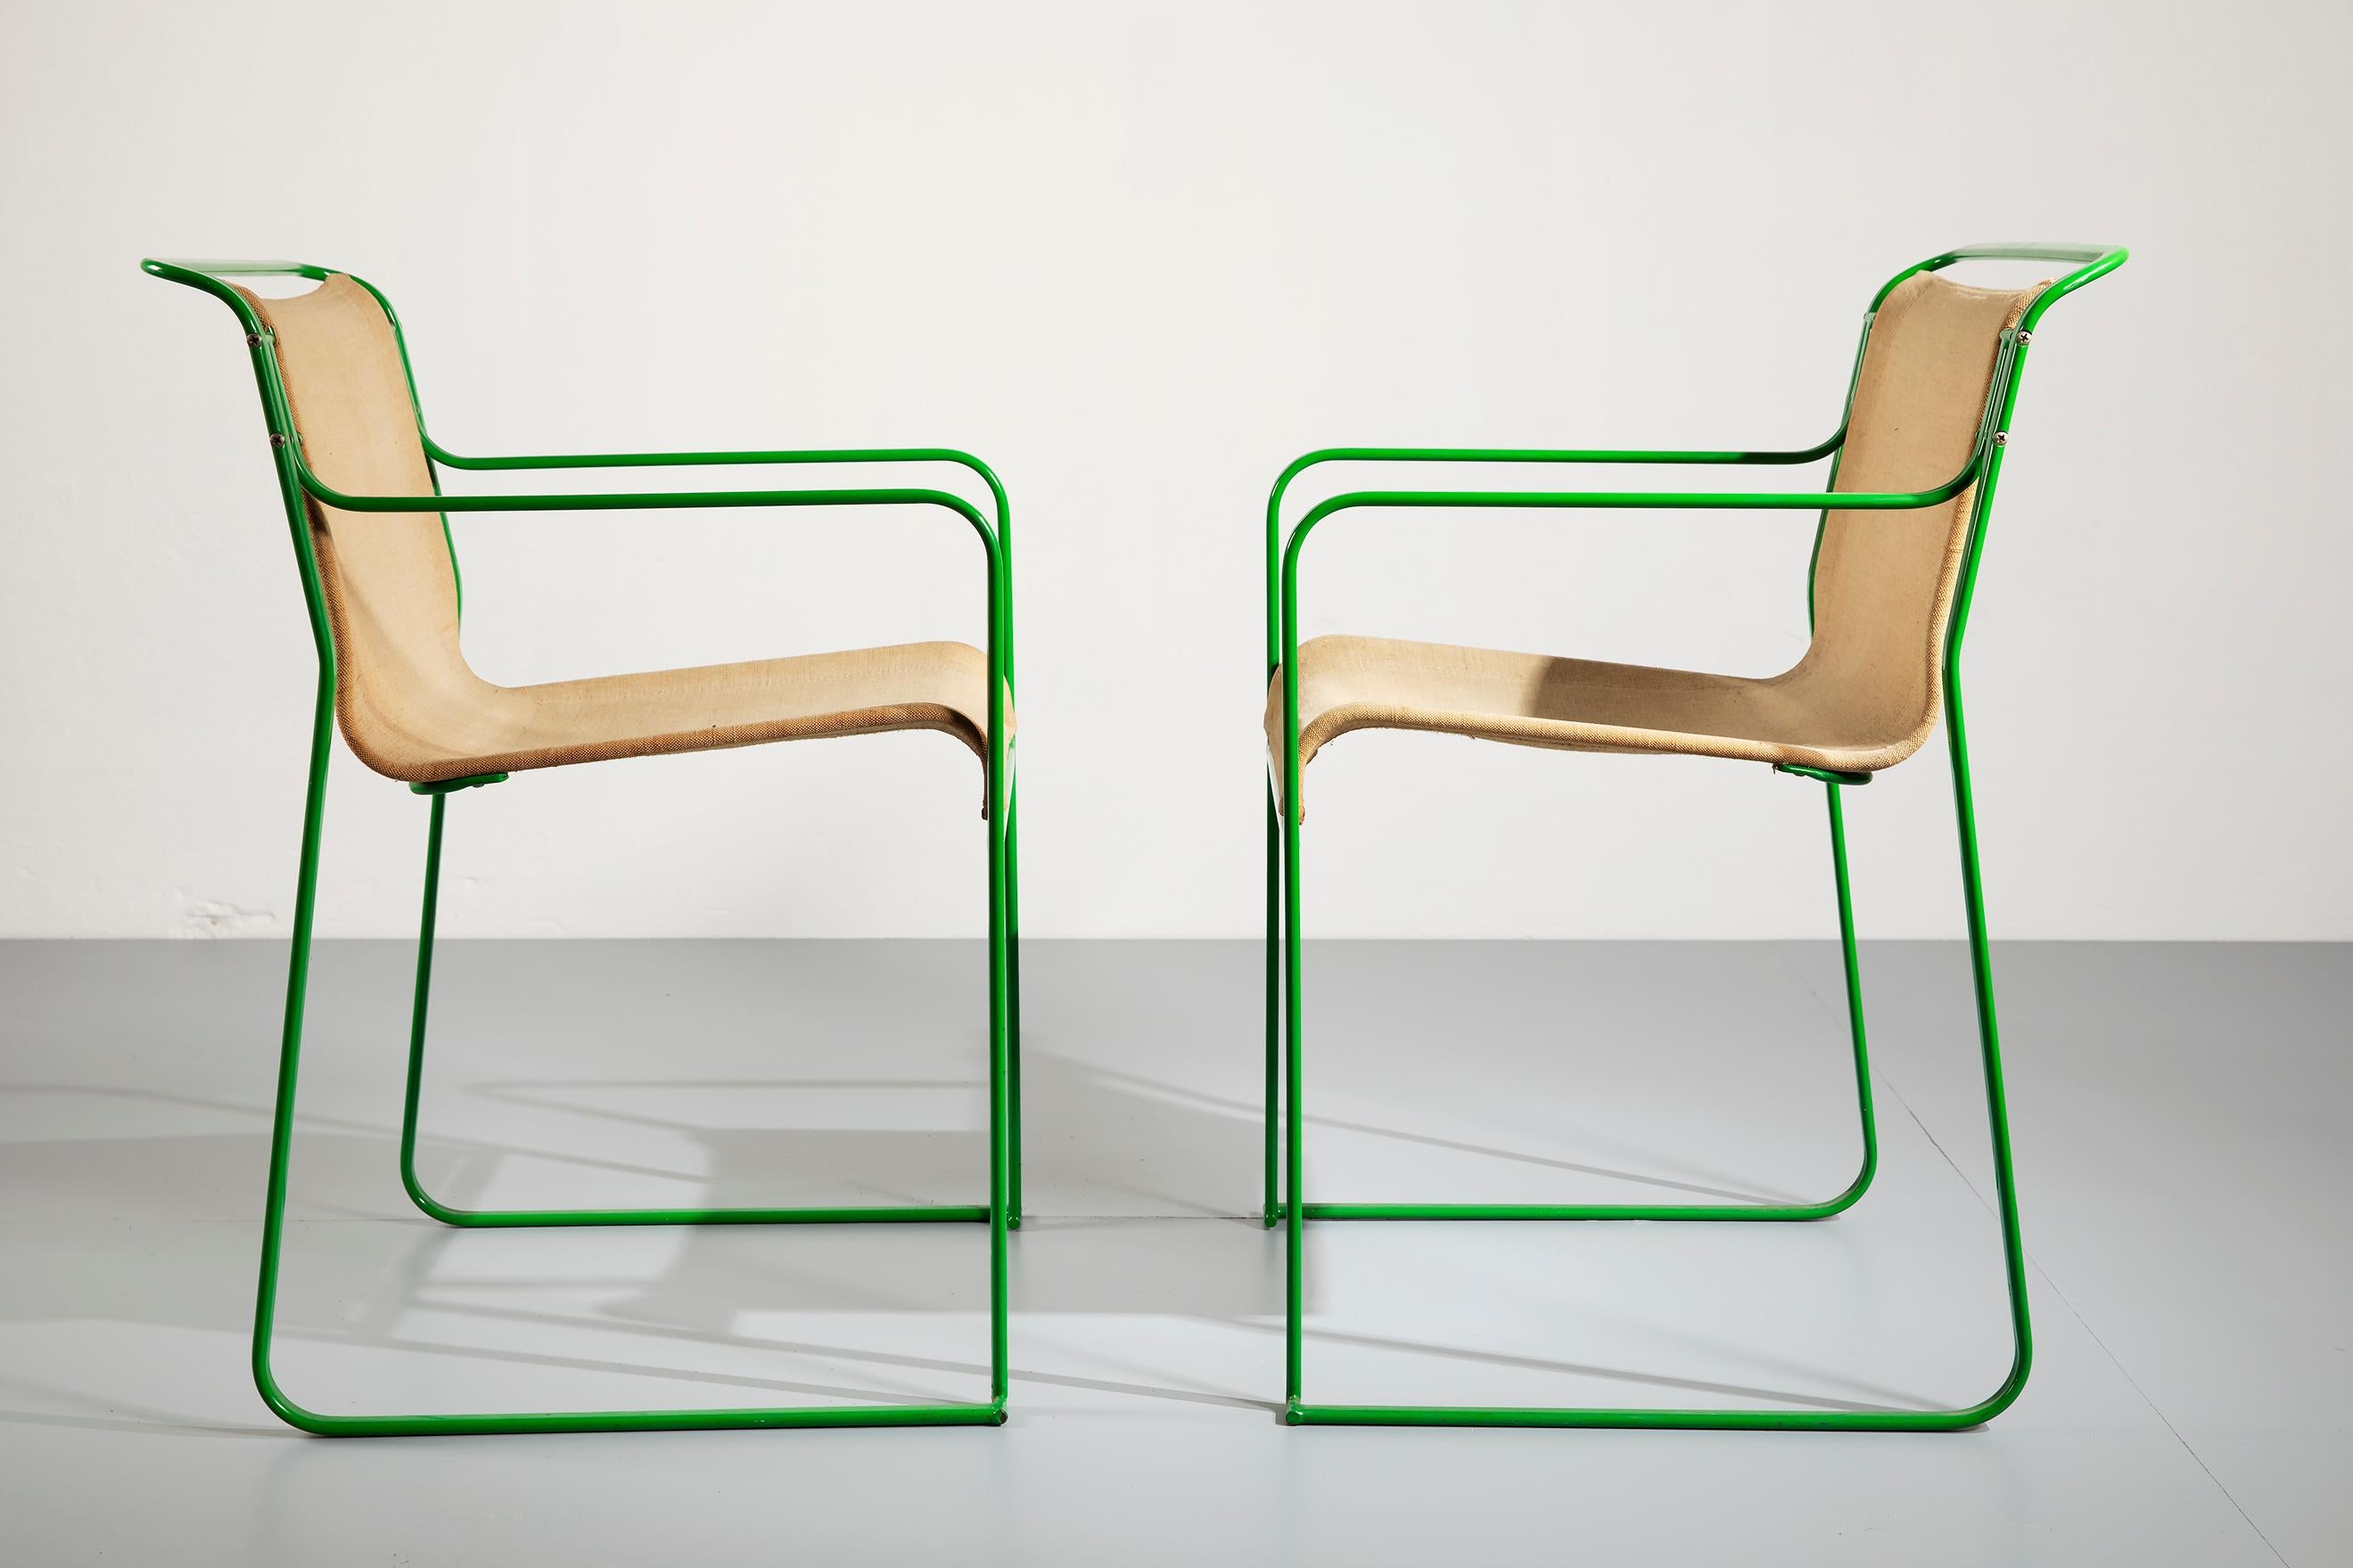 Pair of stackable armchairs designed by Gastone Rinaldi for his own company Thema, in 1979.
The chairs are very comfortable and both in very good conditions. The steel structure is solid, the green varnish has no big losses and the canvas has no